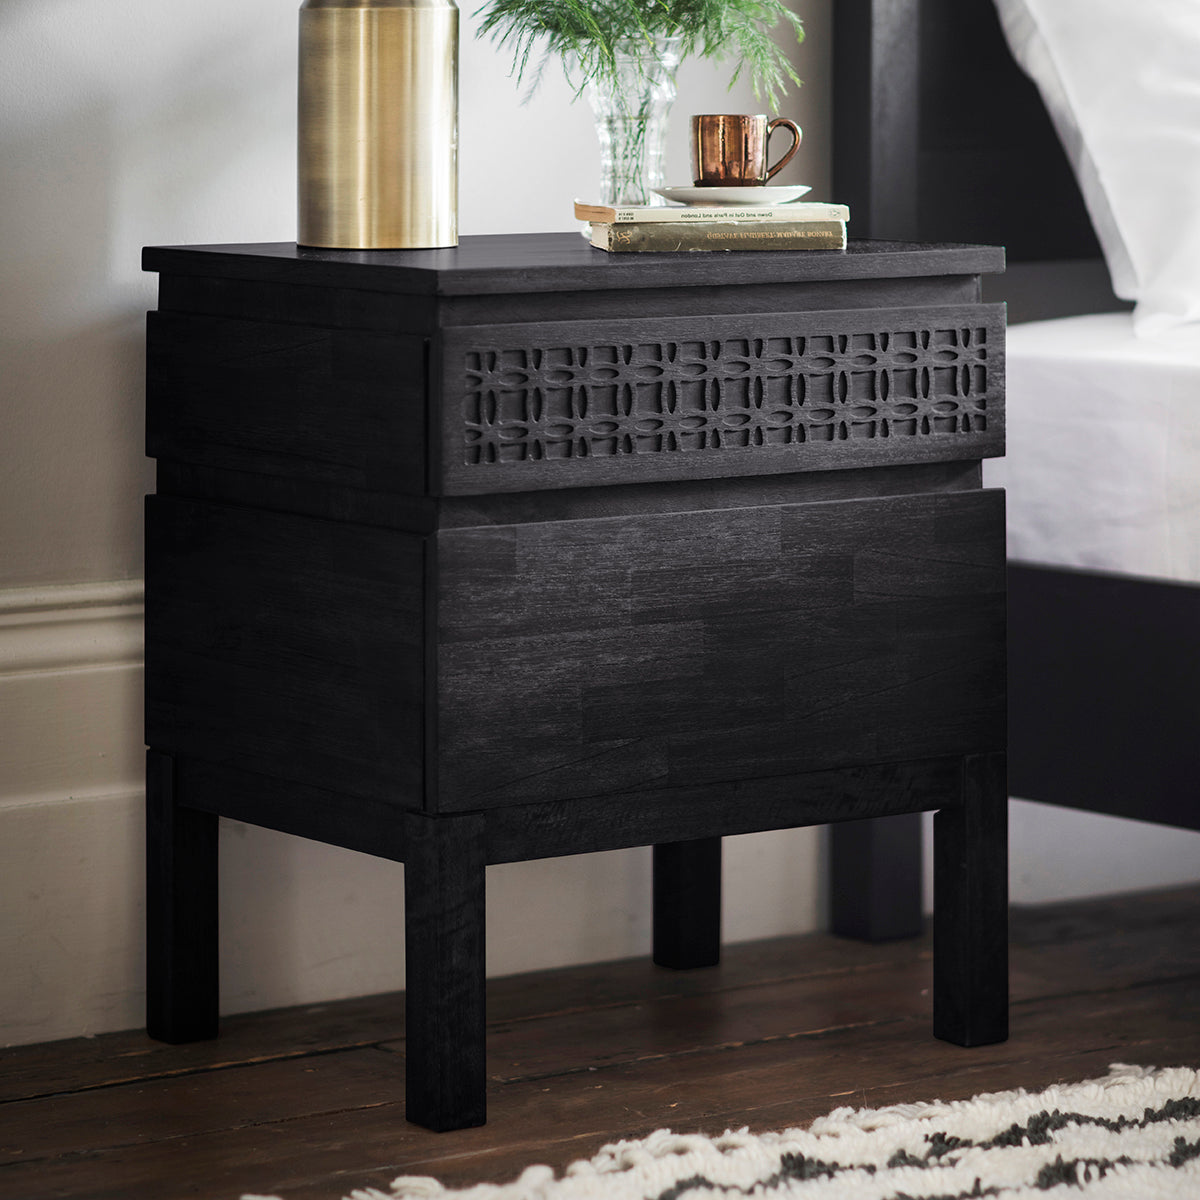 Modern nightstand with intricate detailing on the top drawer looks elegant and stunning in the bedroom setting with a vase, books and cup of coffee. The two drawers offer space for bedtime essentials. 